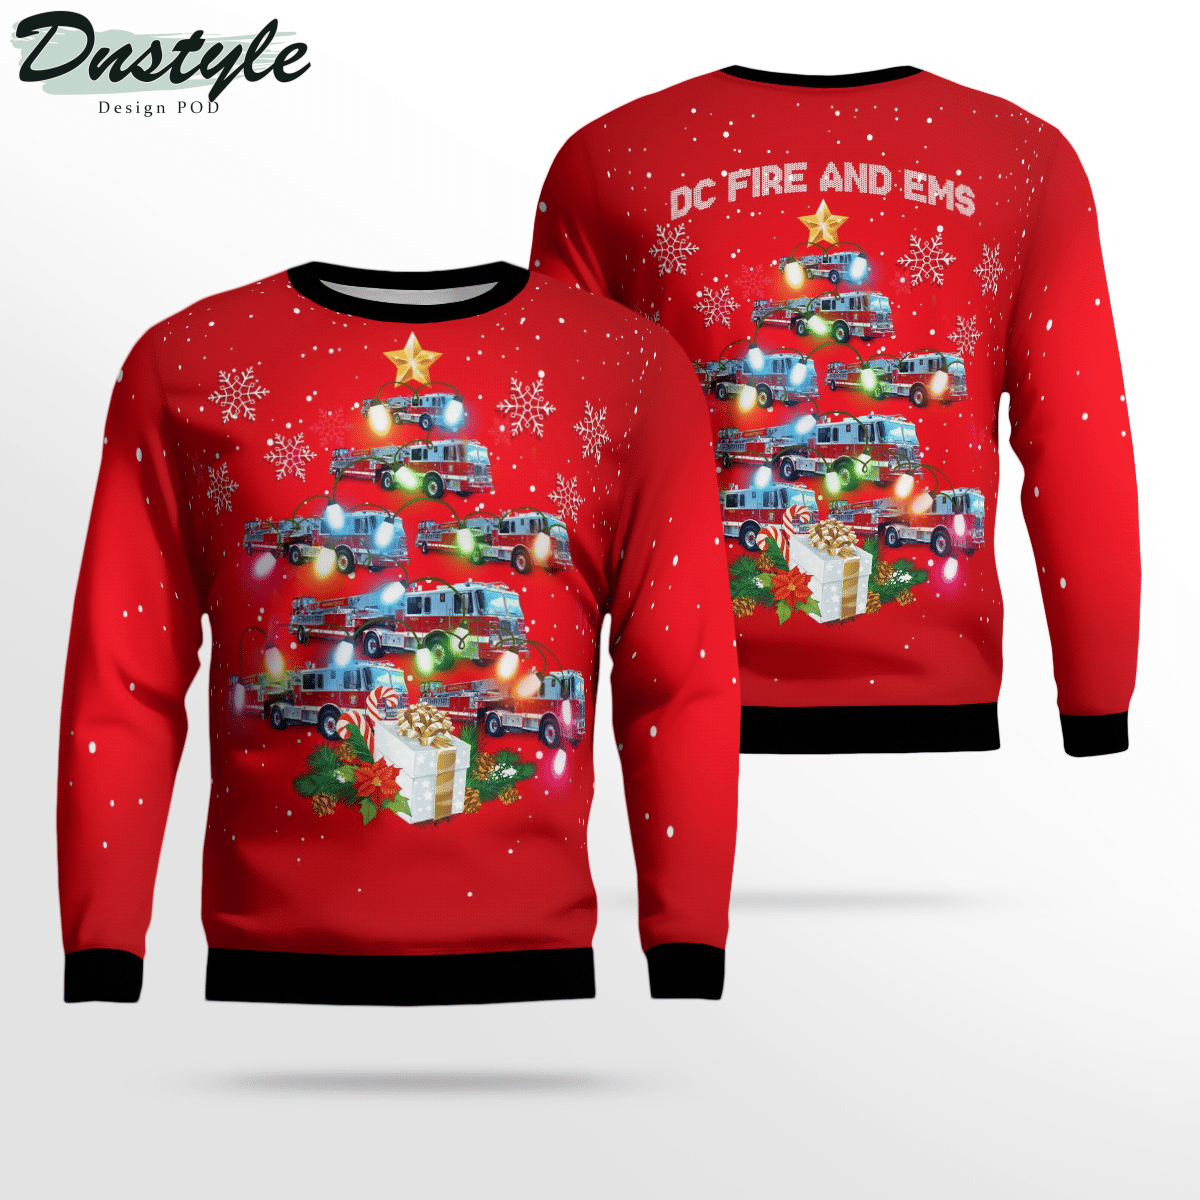 Washington DC Fire And EMS Red Ugly Christmas Sweater